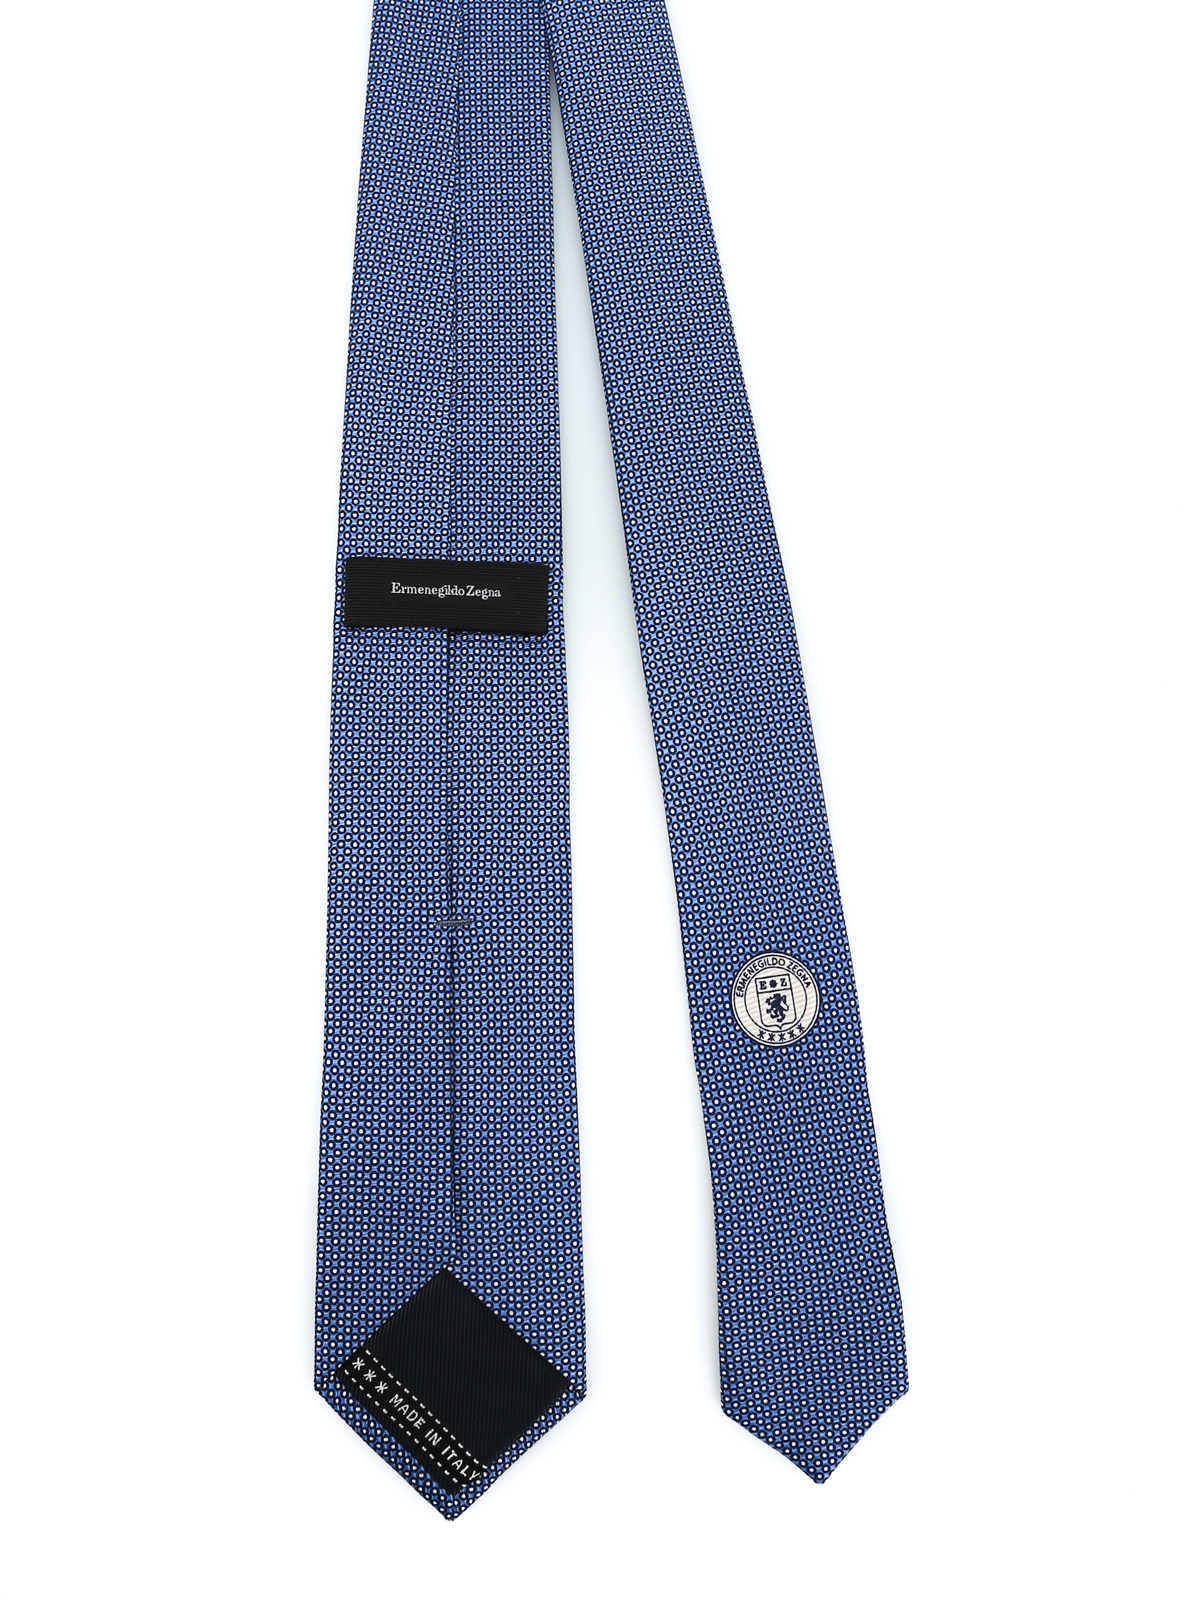 Layer your blues with a silk Burberry tie, $126, and Ermenegildo